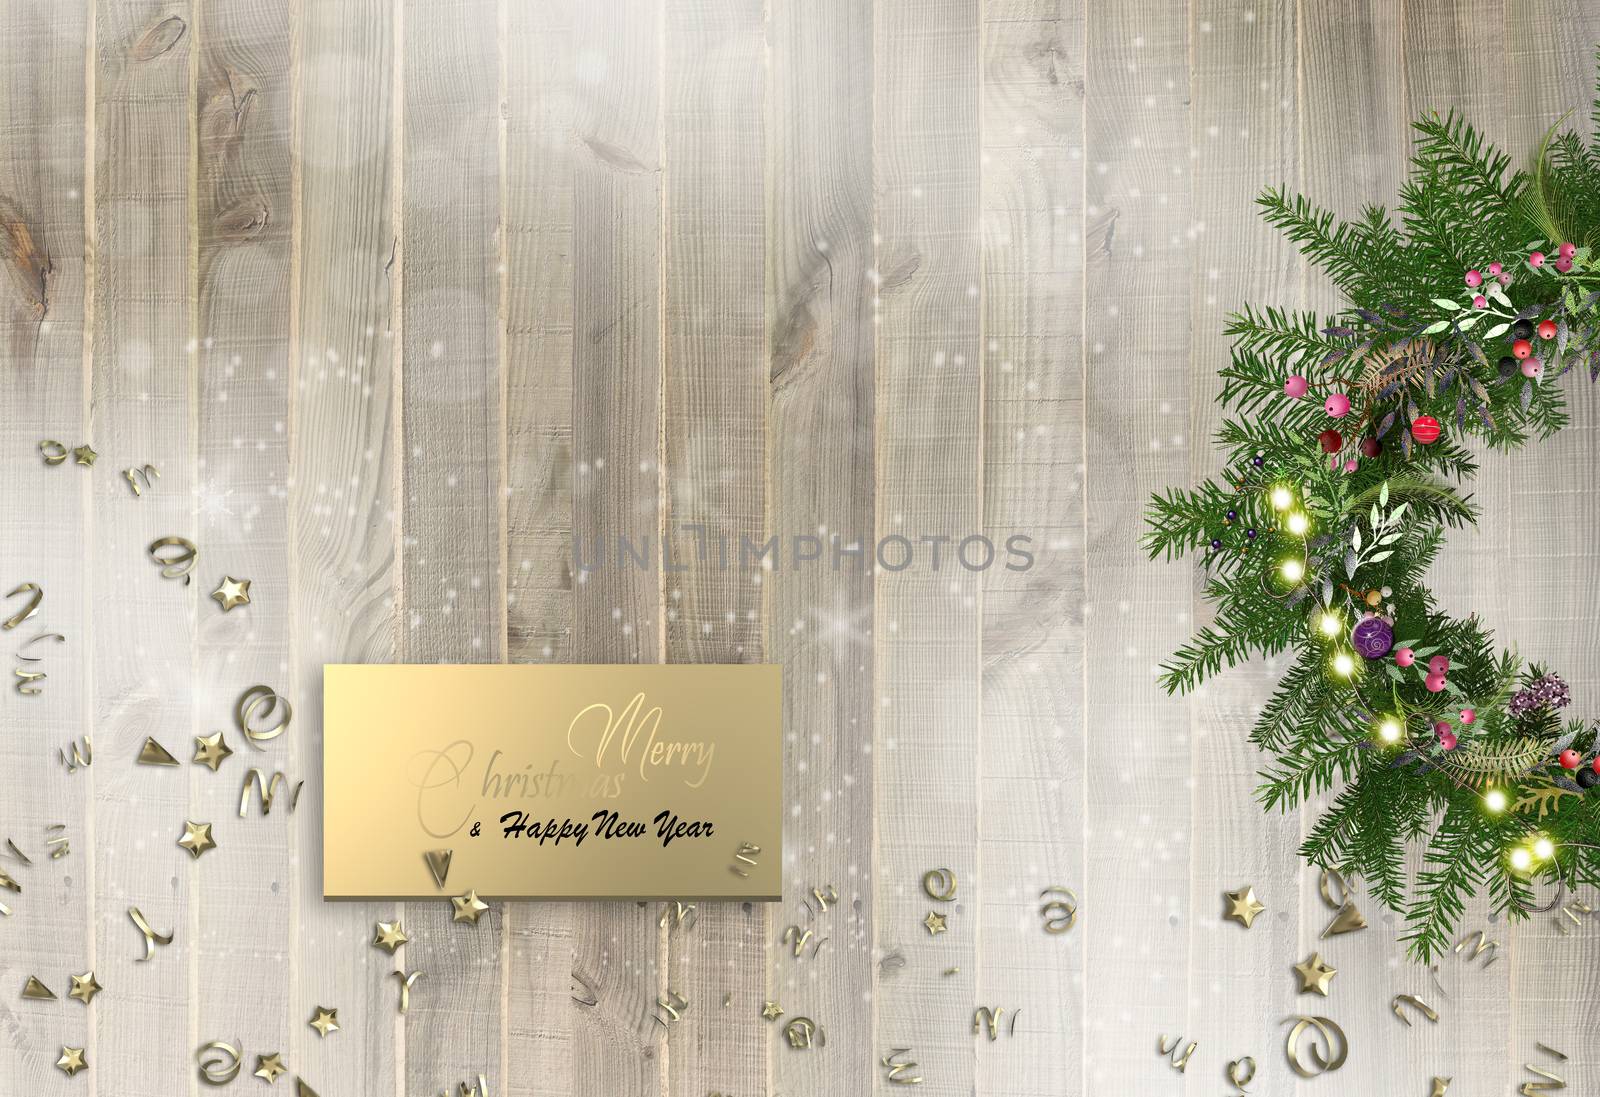 Horizontal Xmas banner on wood with realistic 3D Christmas symbol wreath fir, gold confetti on wooden background with snow. Gold text Merry Christmas. Horizontal 3D illustration. Flat lay, top view